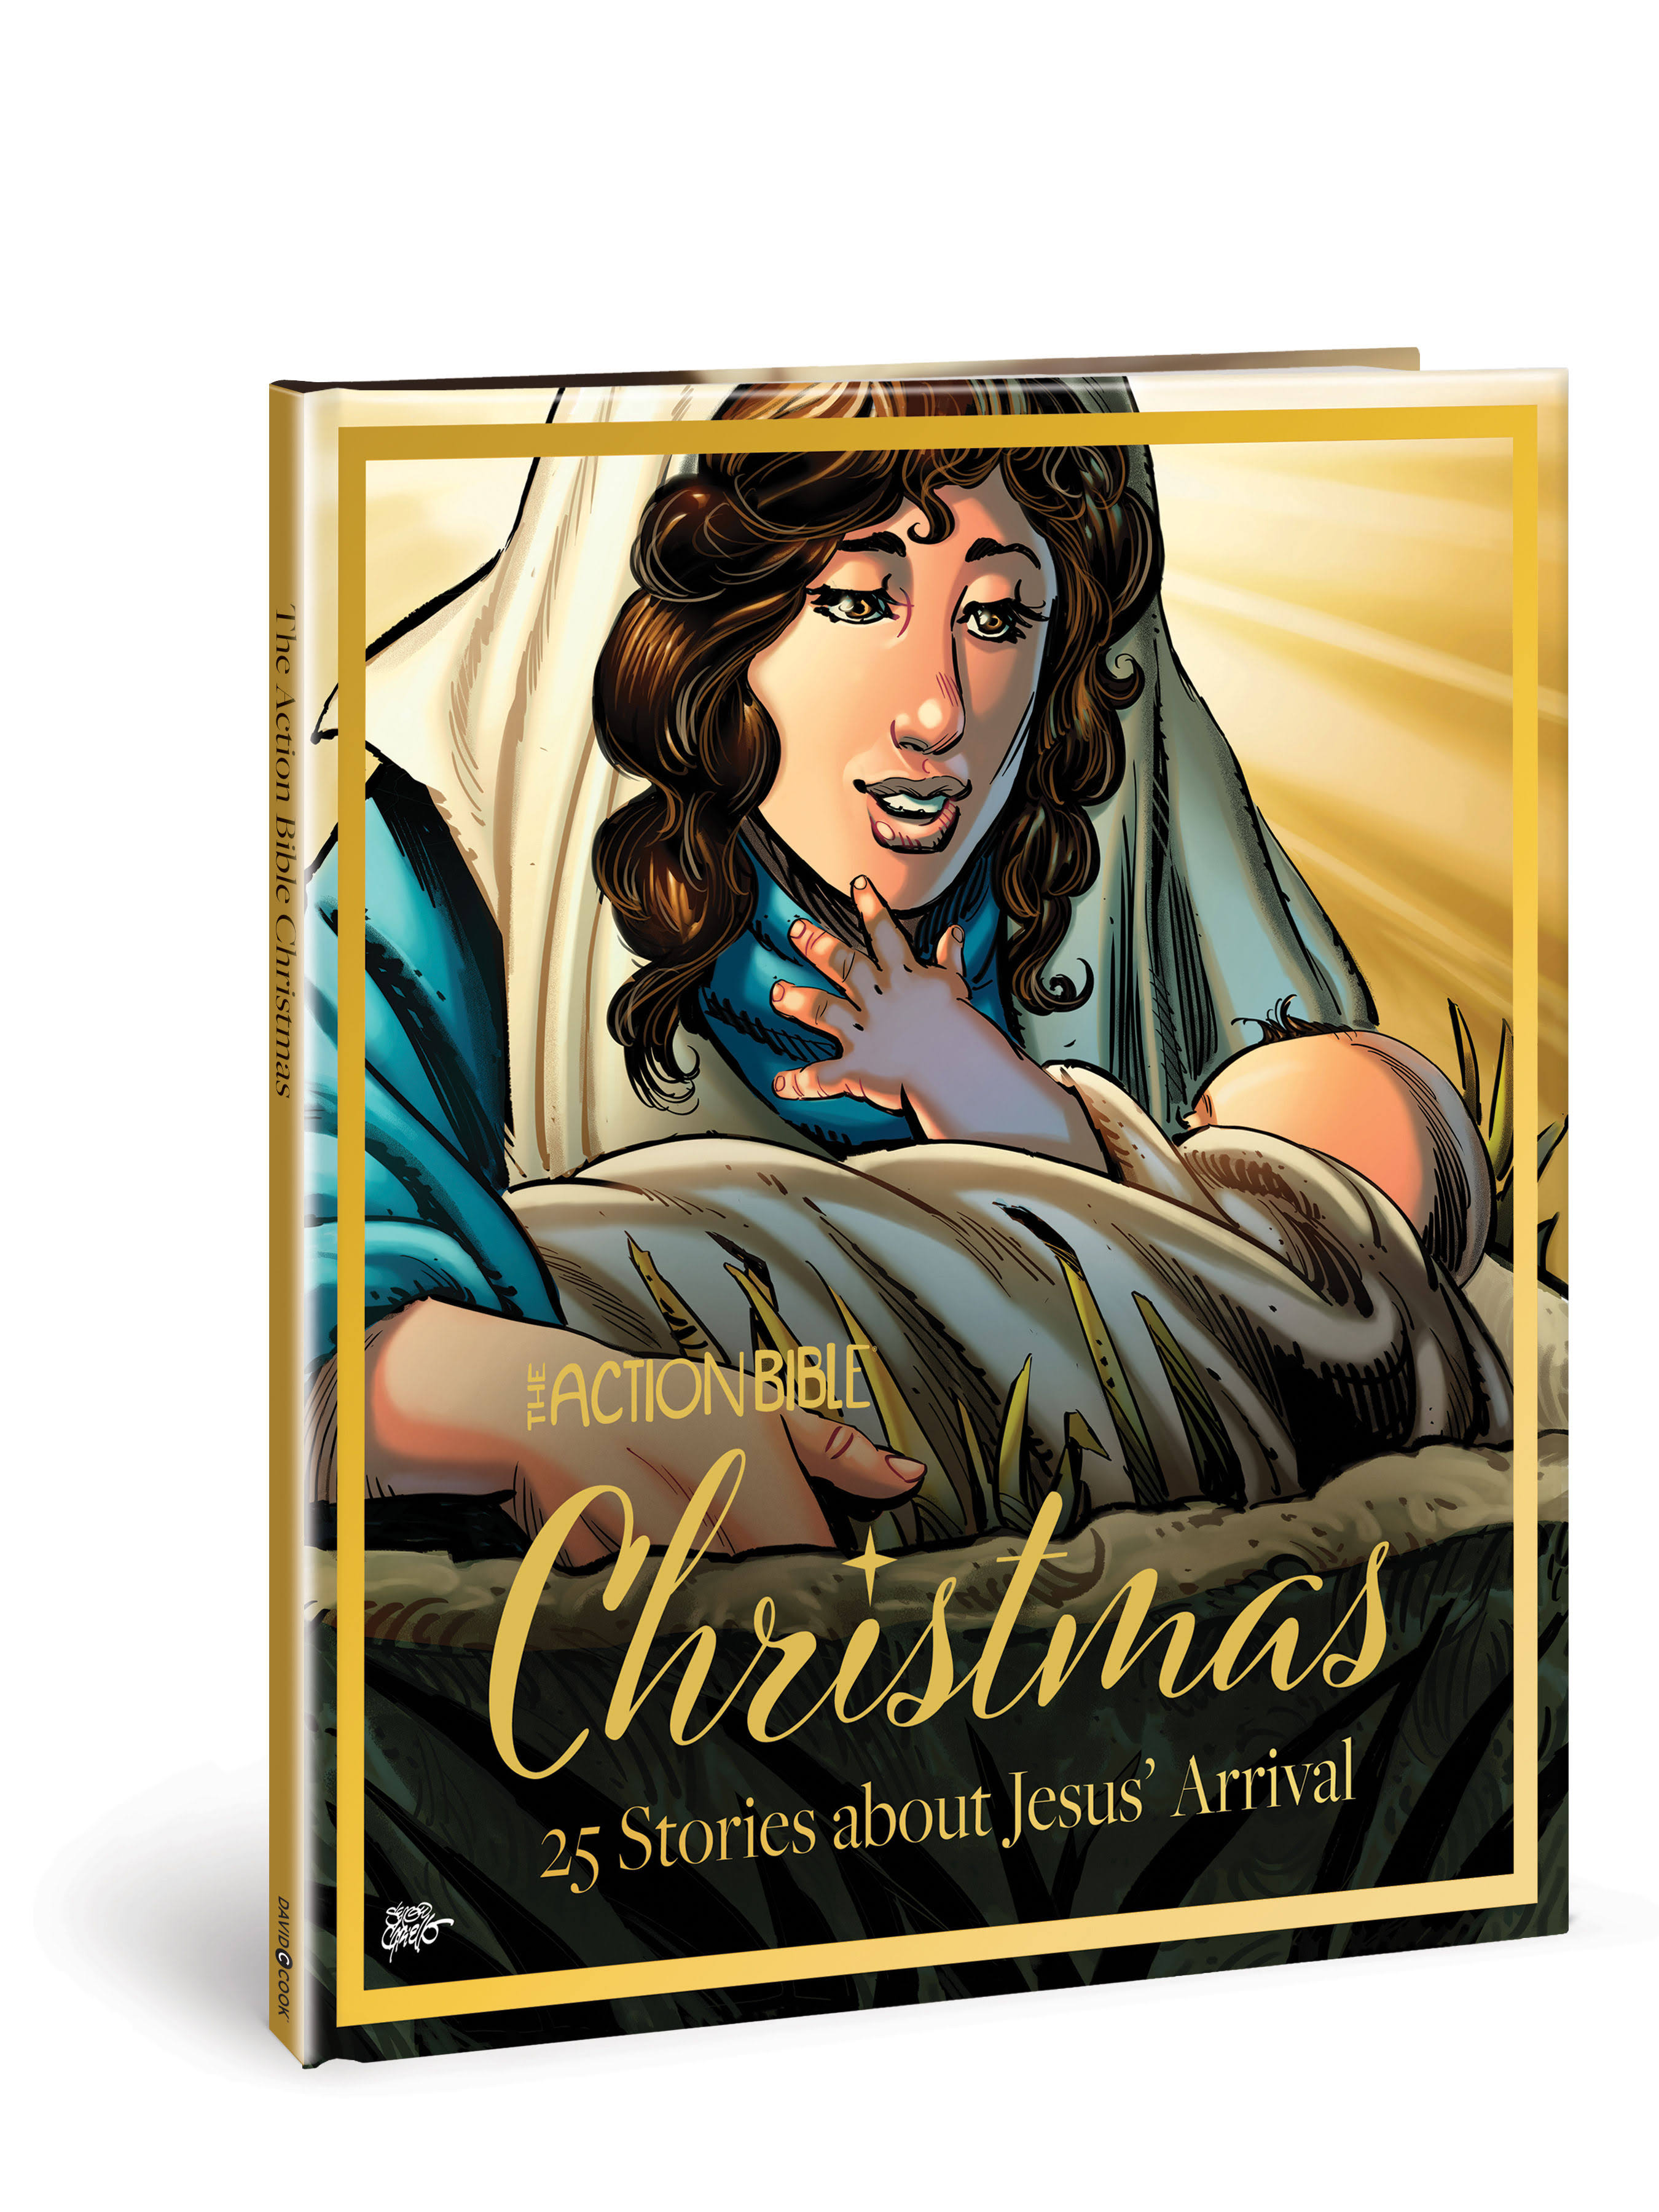 The Action Bible Christmas by Sergio Cariello